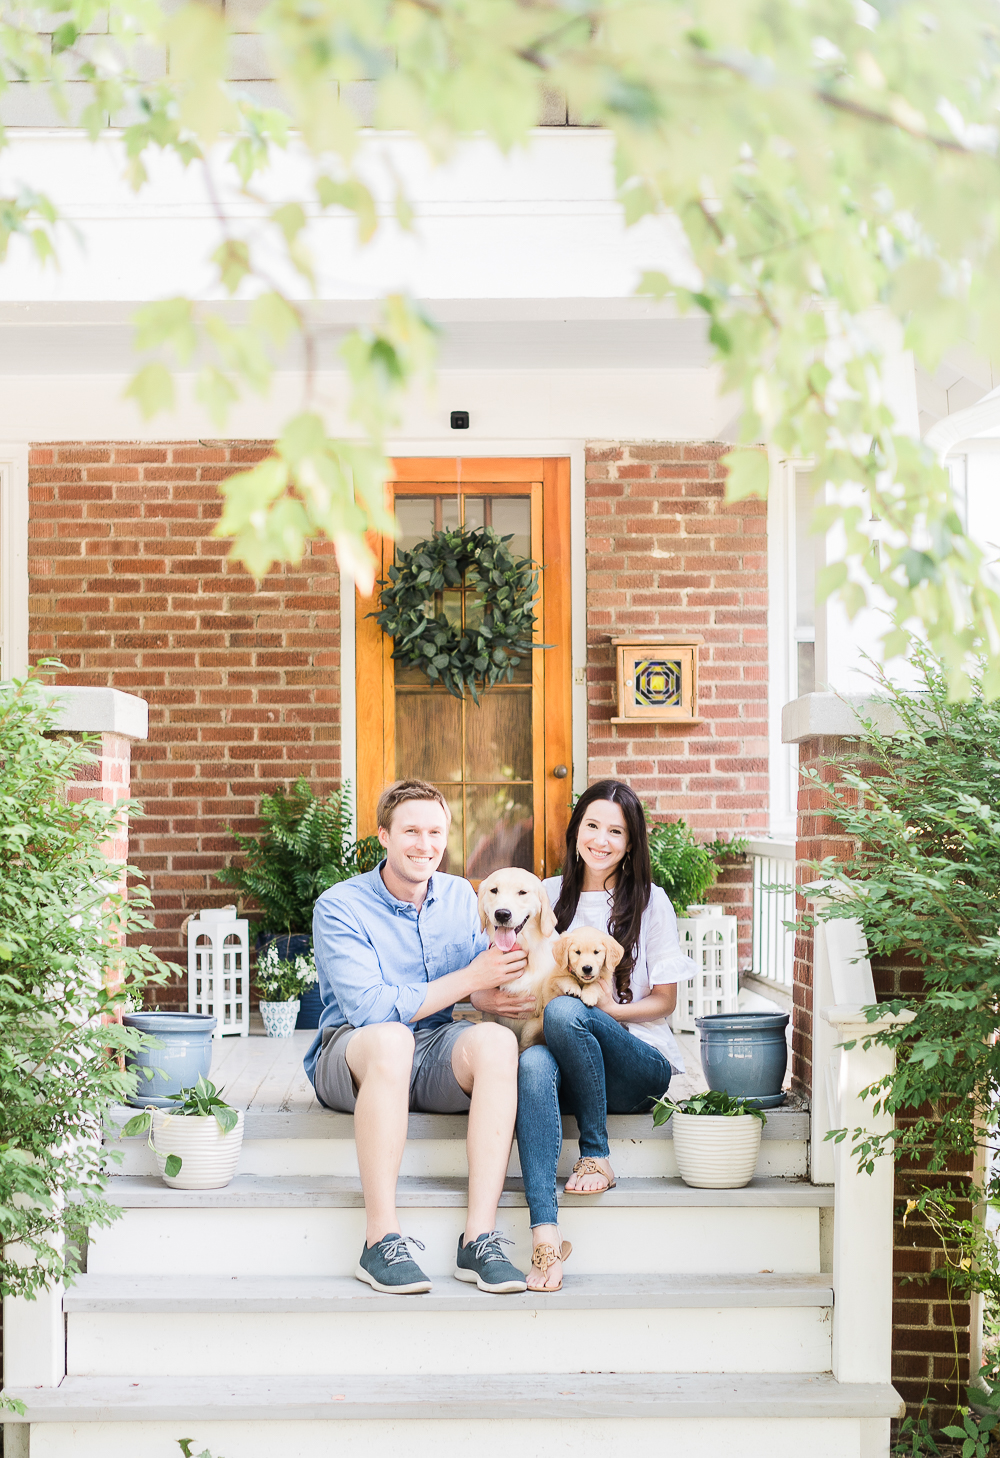 Blink XT Review: Why We Chose the Blink Home Security System by southern lifestyle blogger Stephanie Ziajka from Diary of a Debutante, blink camera review, blink home security review, best diy home security system